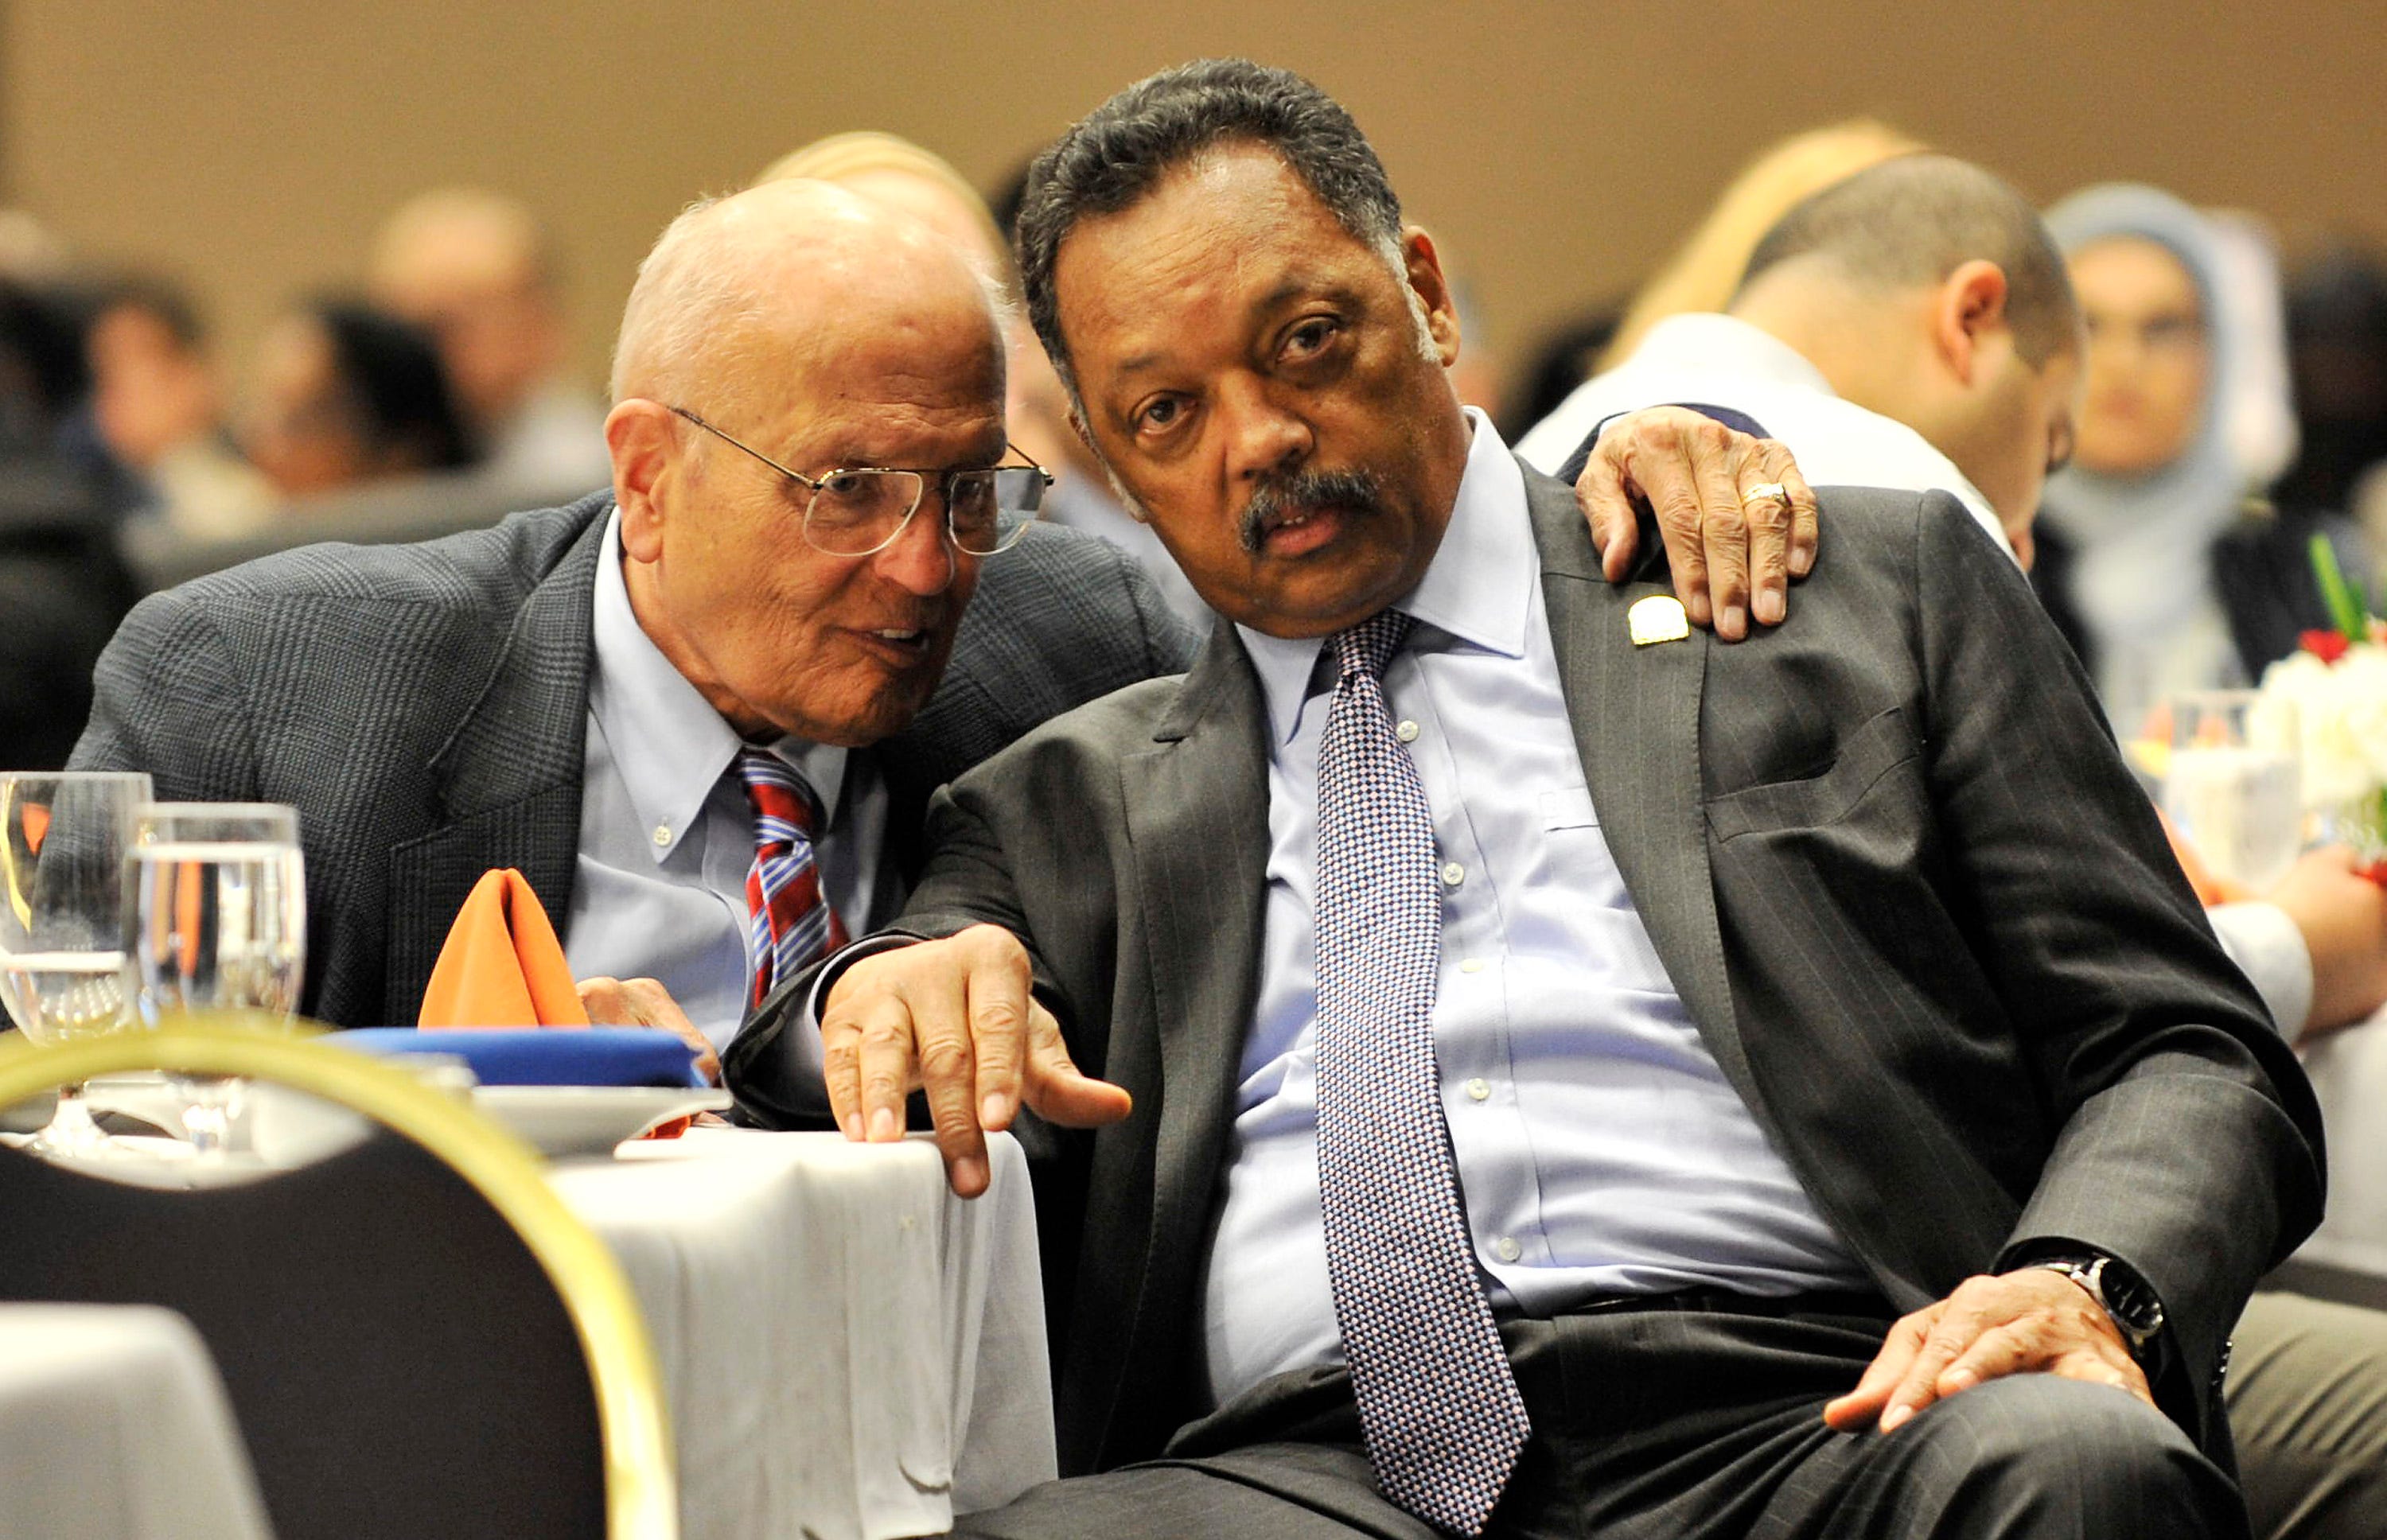 Dingell talks with Rev. Jesse Jackson, president of the Rainbow/PUSH Coalition,  at the 10th annual fundraising banquet for the Council on American Islamic Relations Michigan chapter at the Hyatt Regency in Dearborn on March 28, 2010.